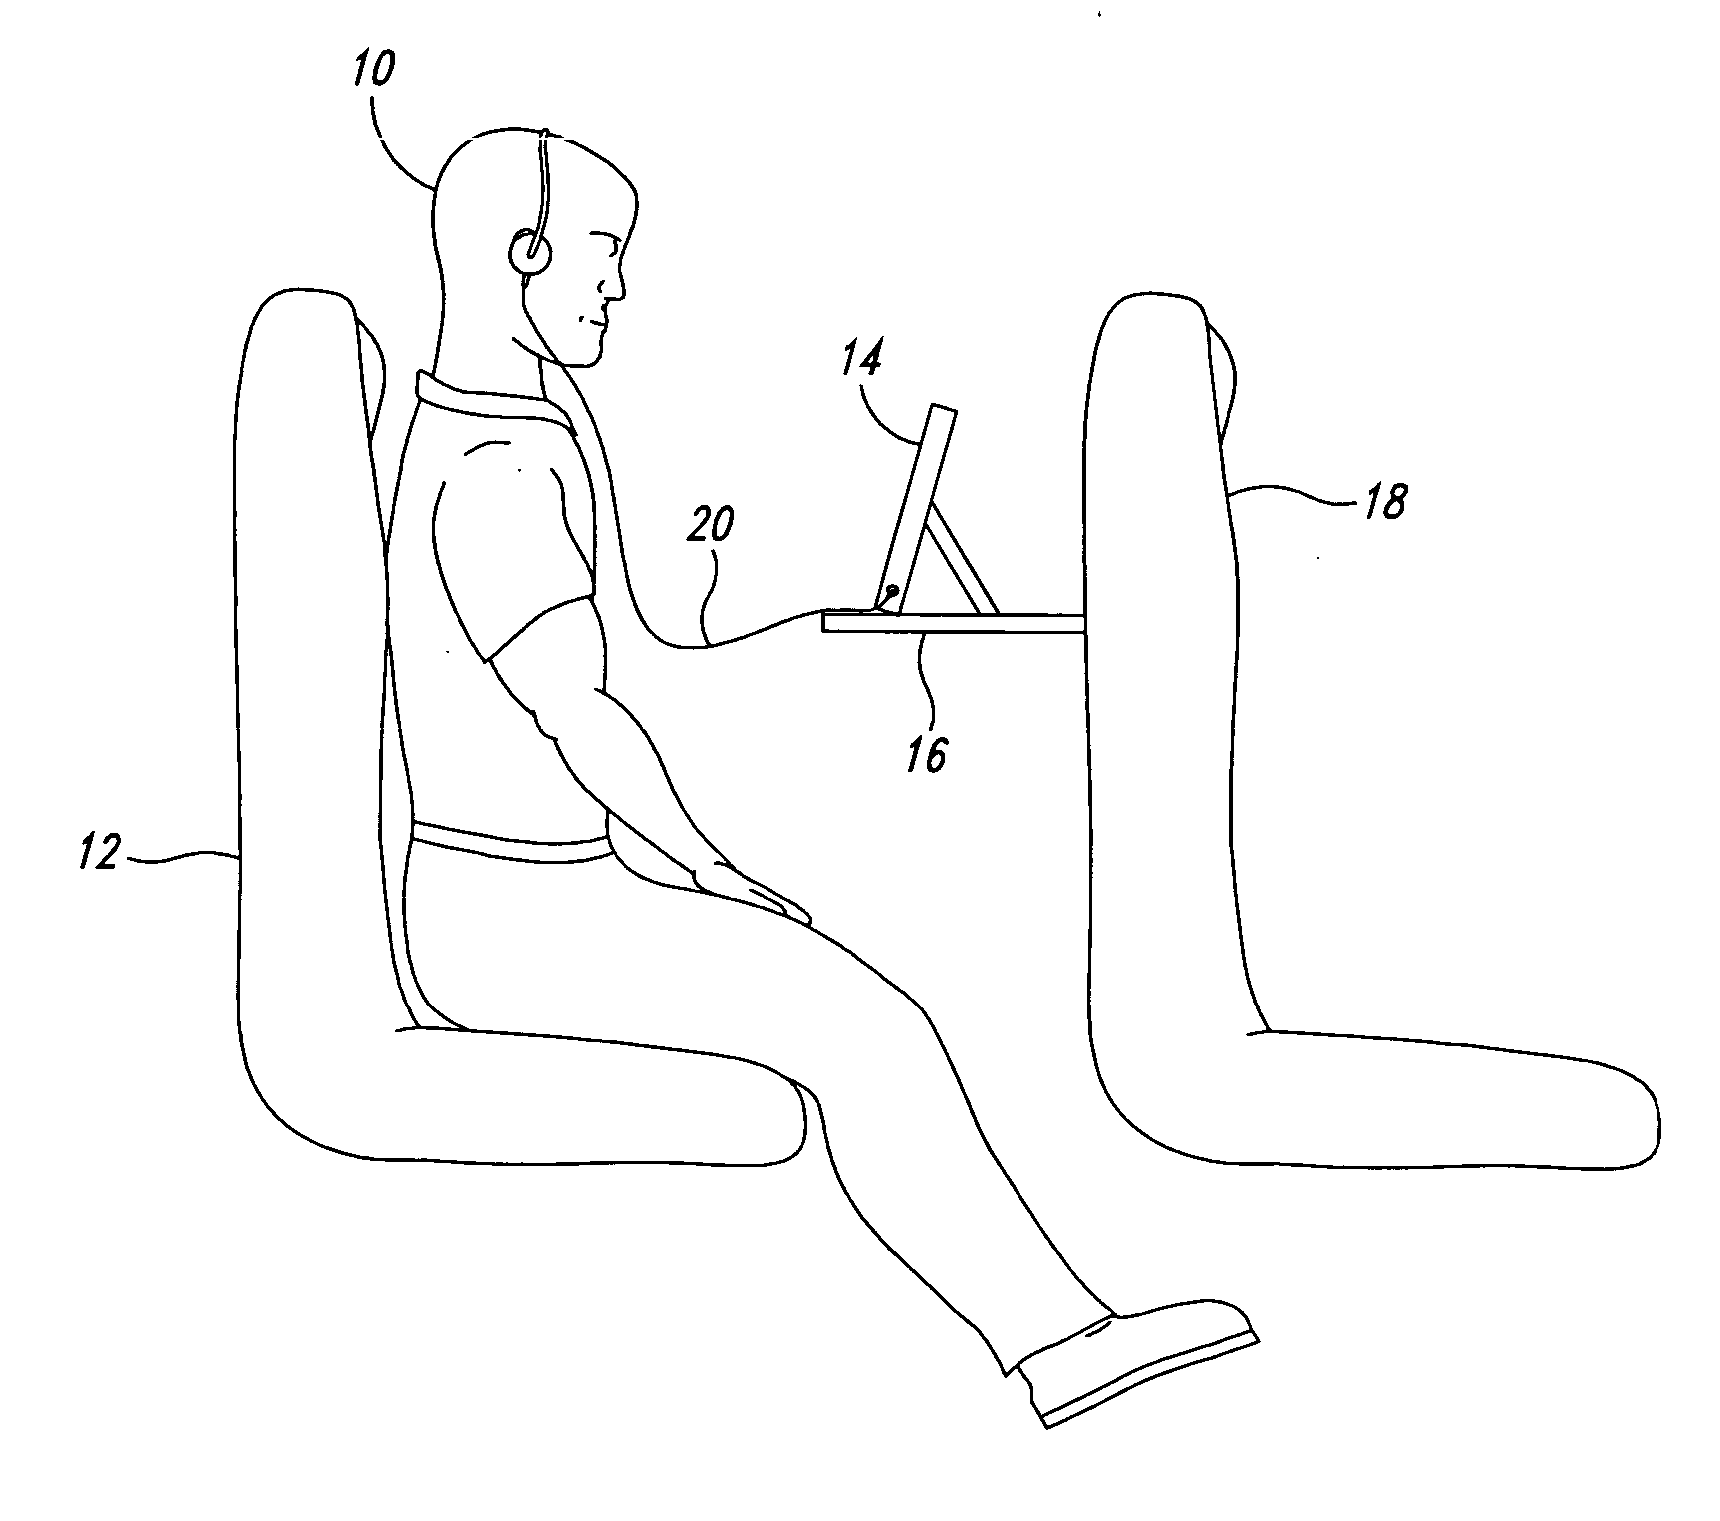 Management method of in-flight entertainment device rentals having self-contained audio-visual presentations